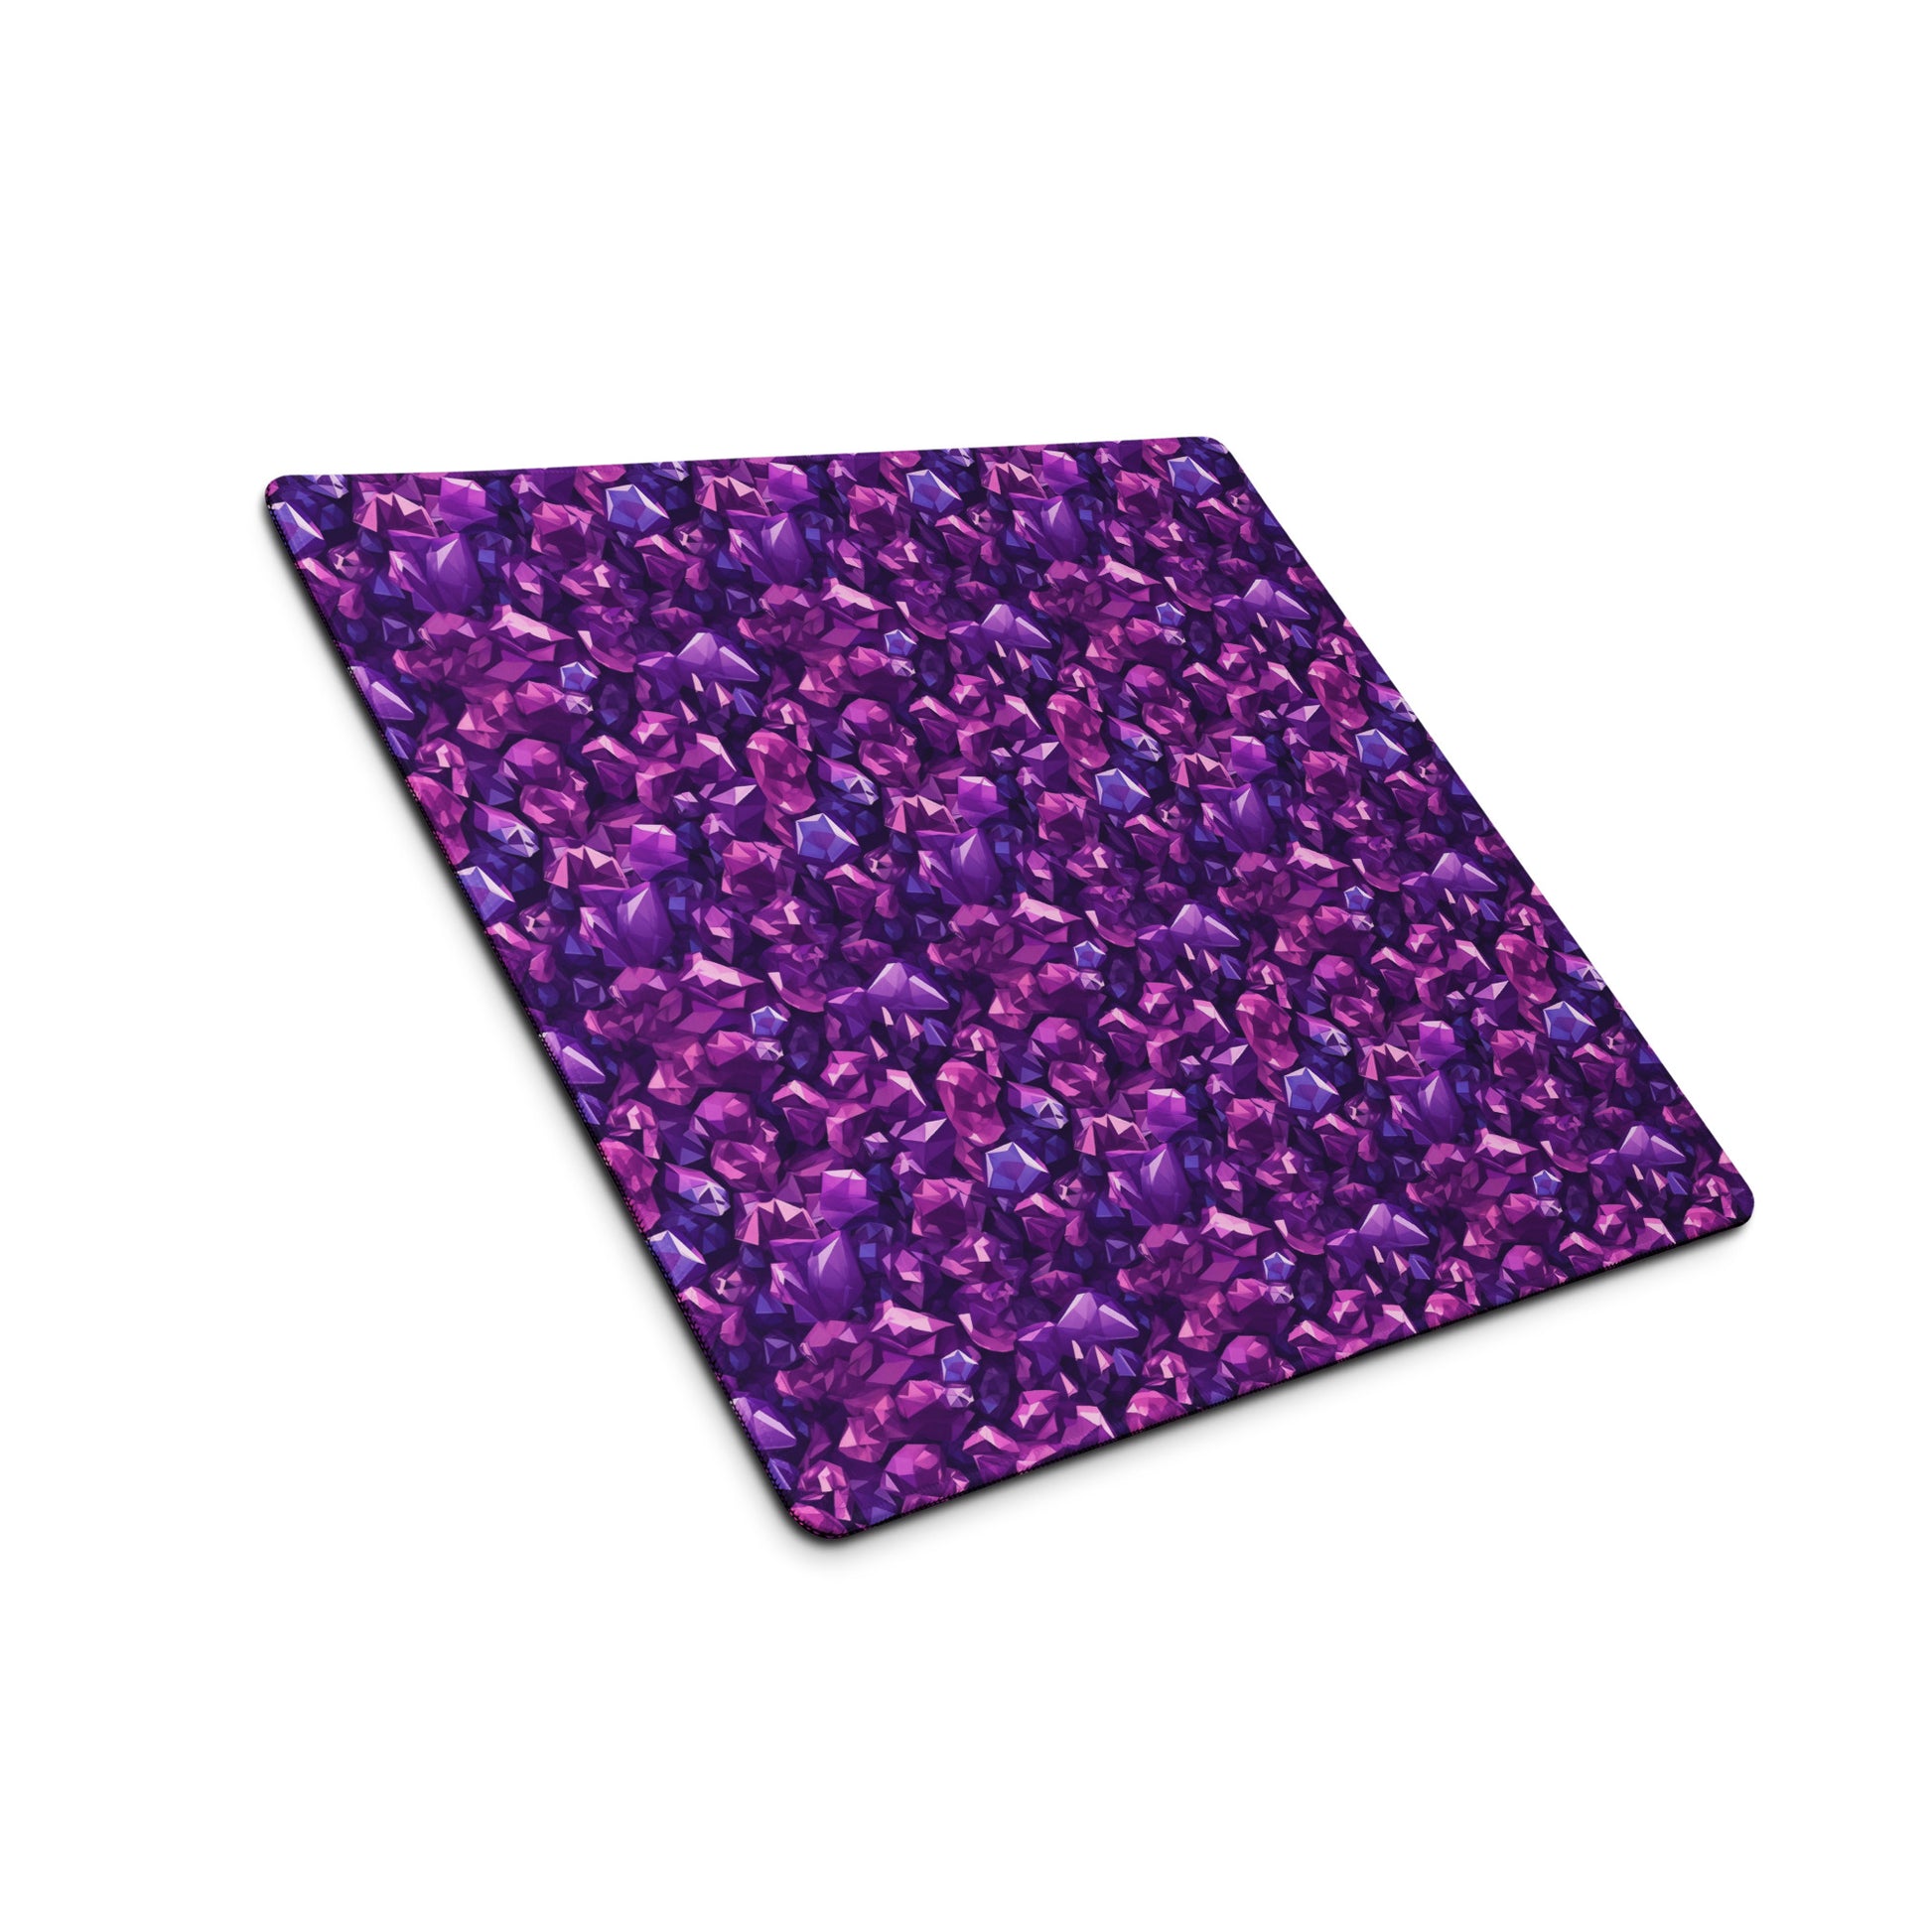 An 18" x 16" gaming desk pad with purple crystals sitting at an angle.